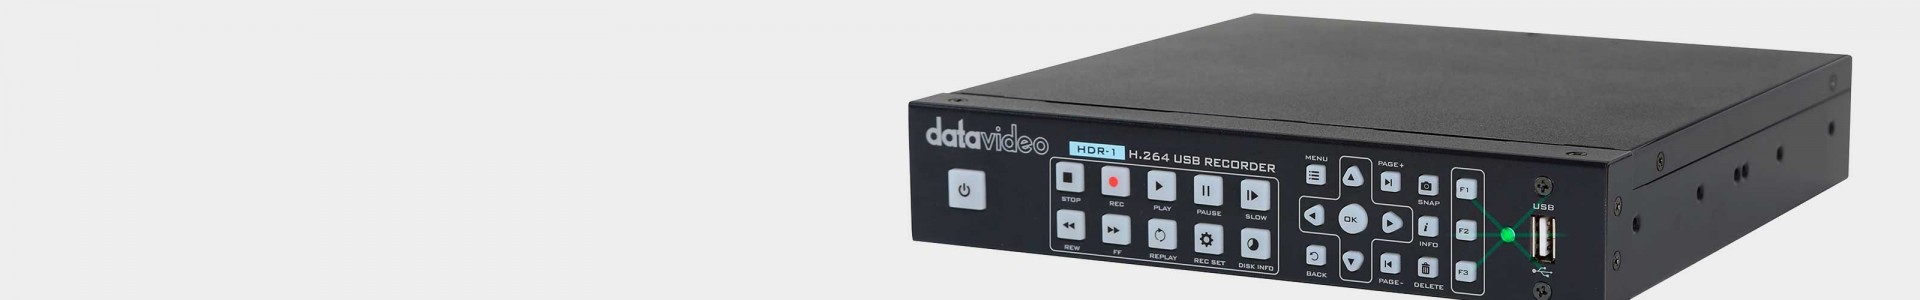 Datavideo Video Recorders - Professional solutions - Avacab